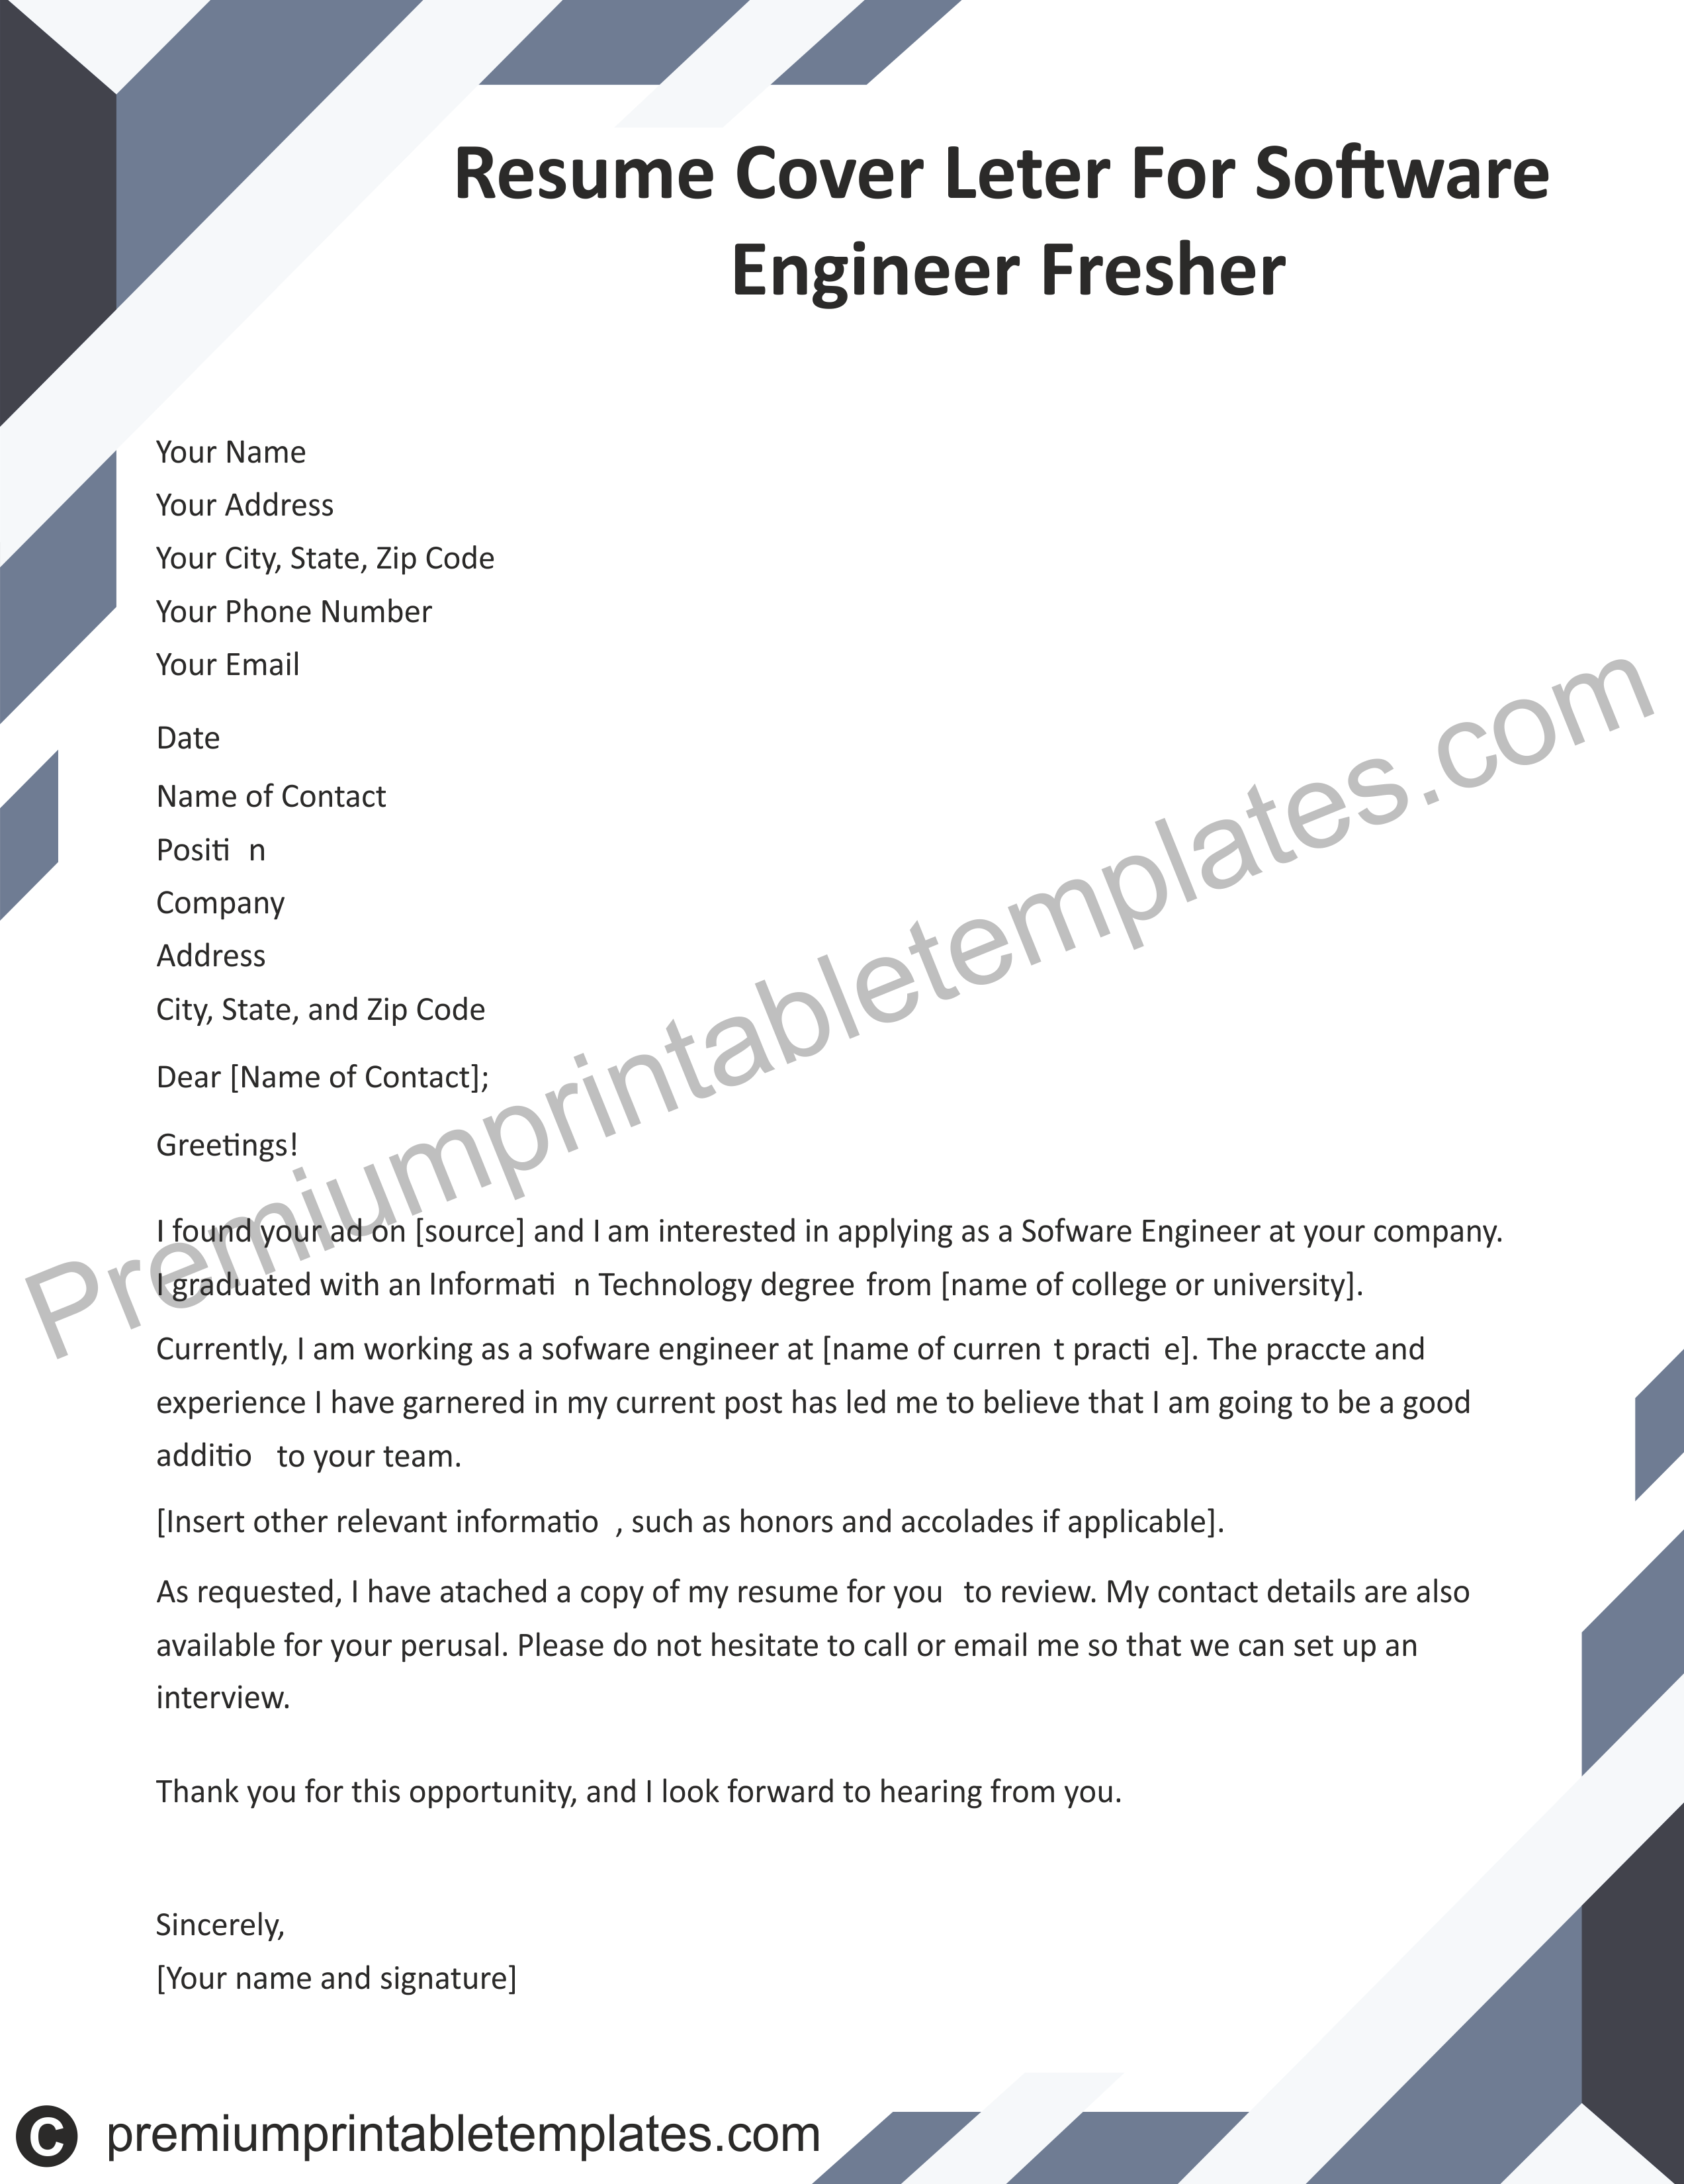 Computer engineer resume cover letter quality